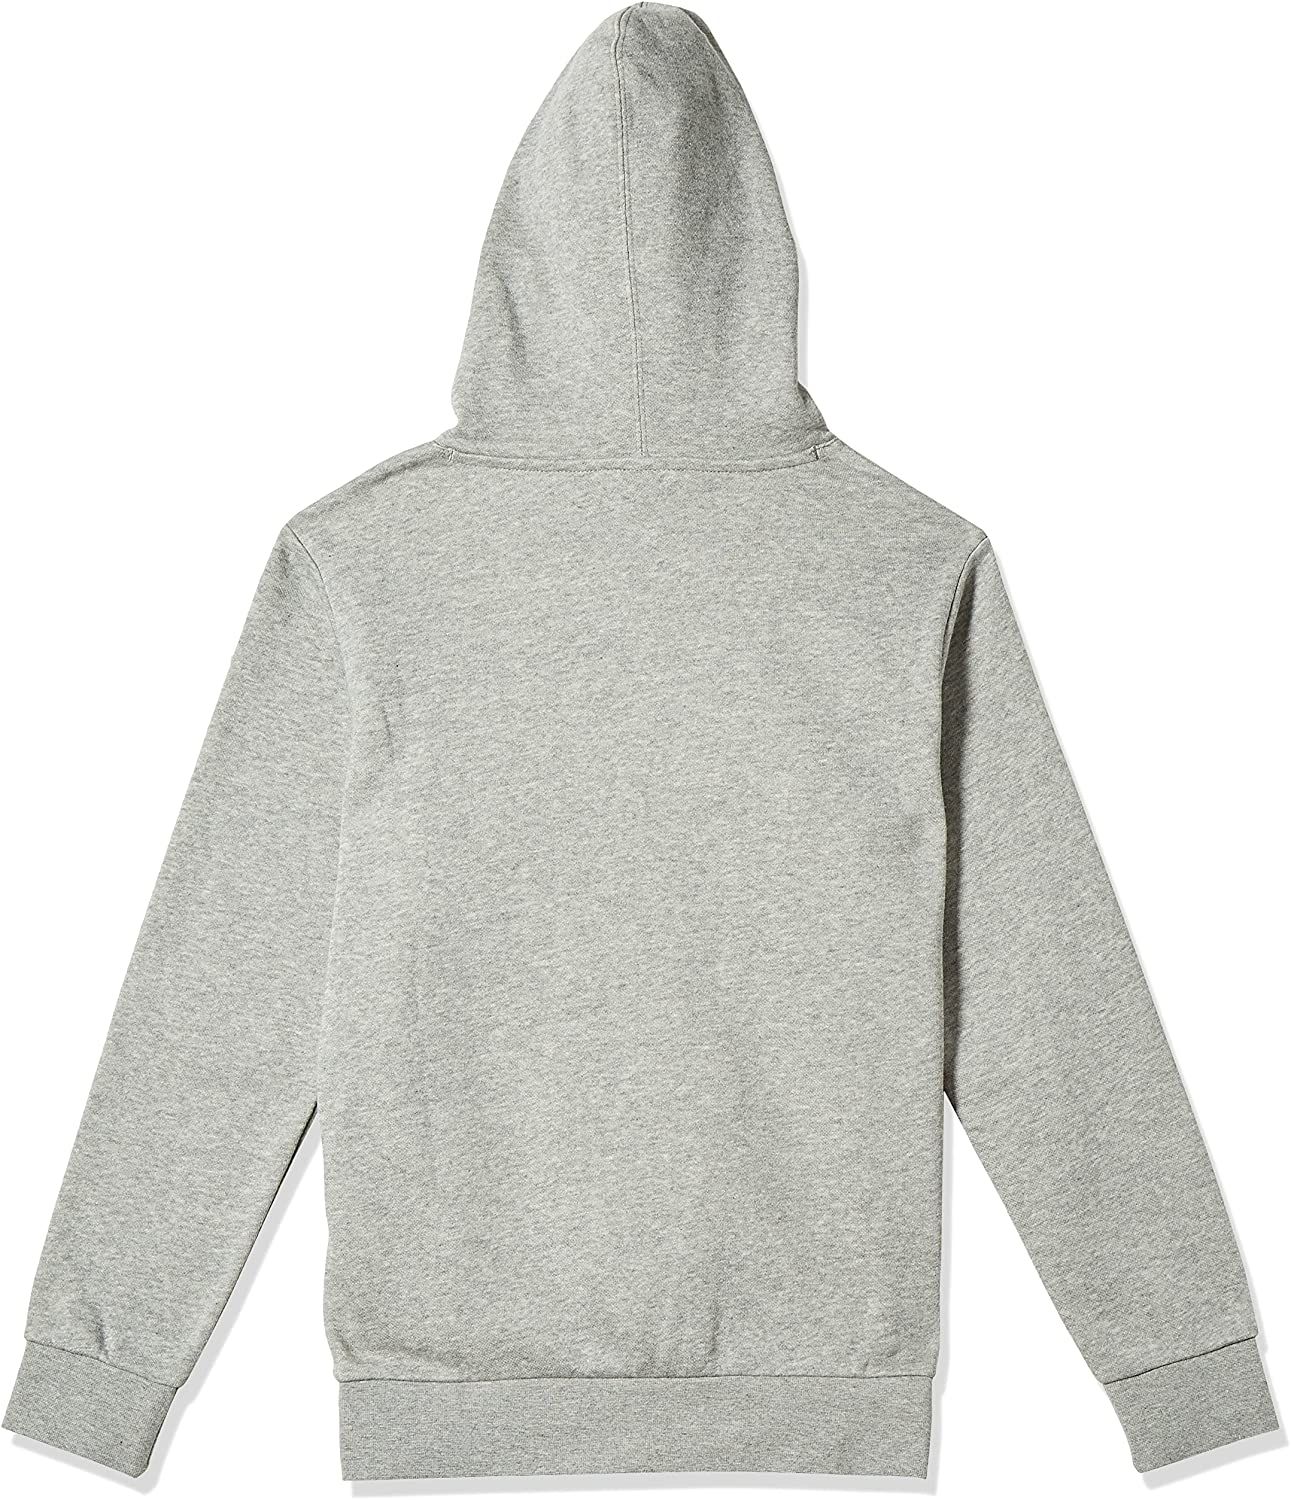 •79% Cotton, 21% Polyester •Double Pocket •Hood